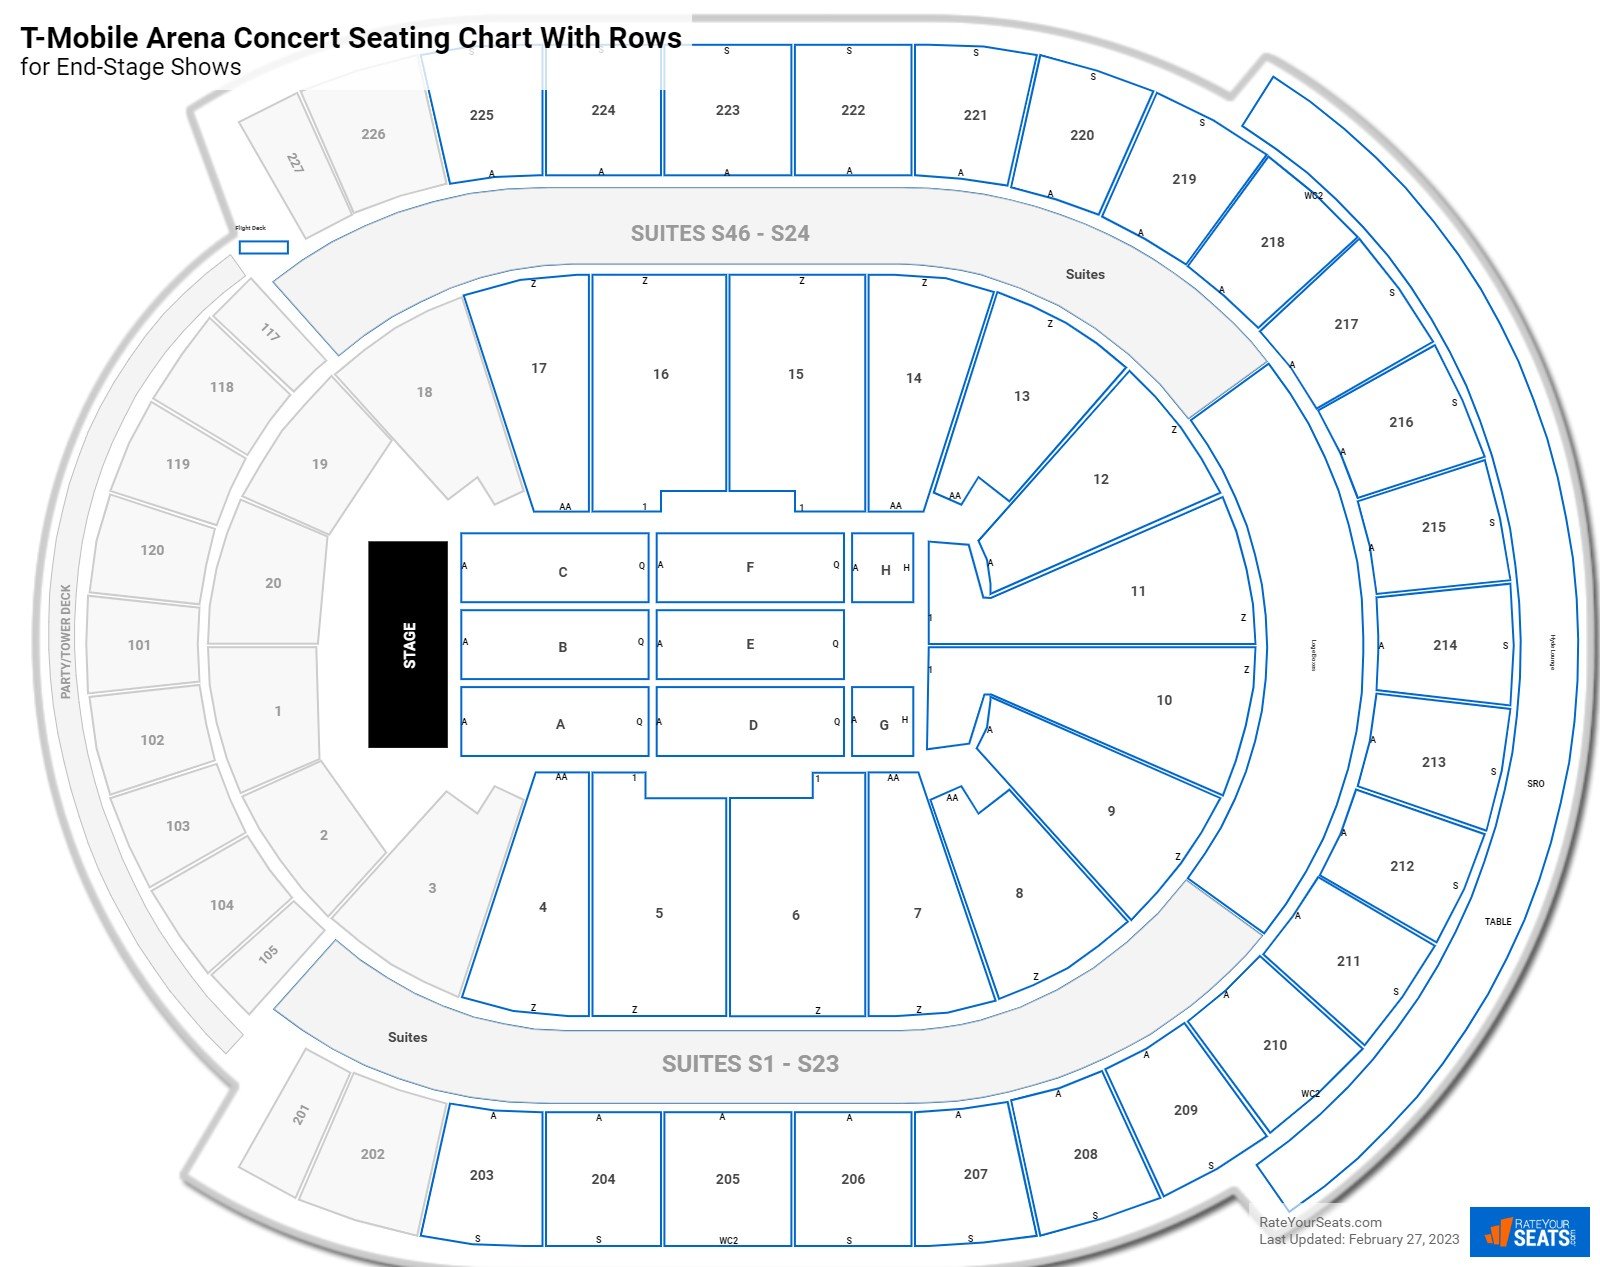 T-Mobile Arena seating chart with row numbers